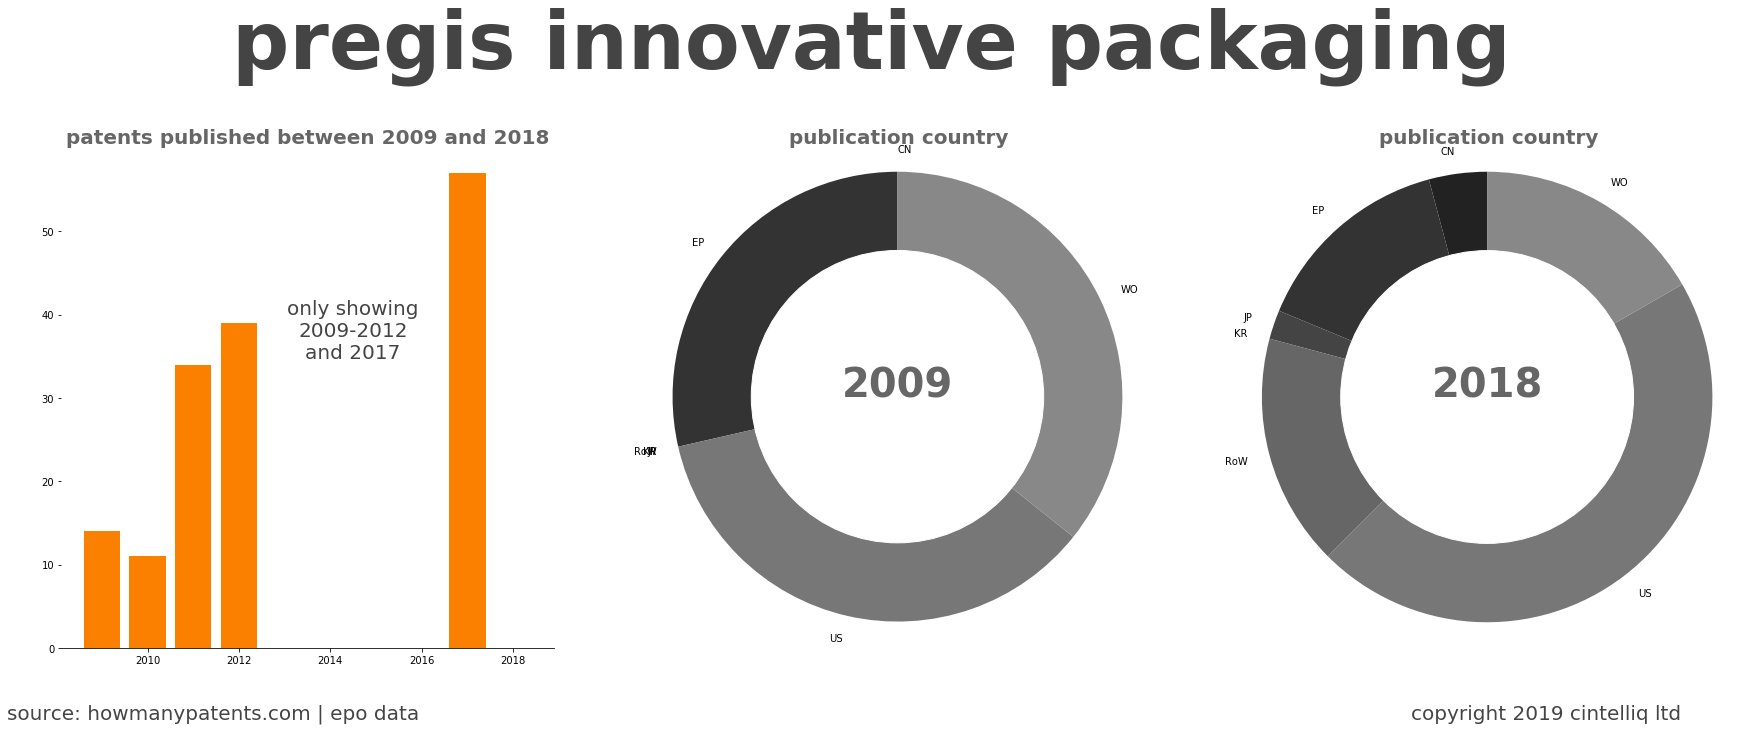 summary of patents for Pregis Innovative Packaging